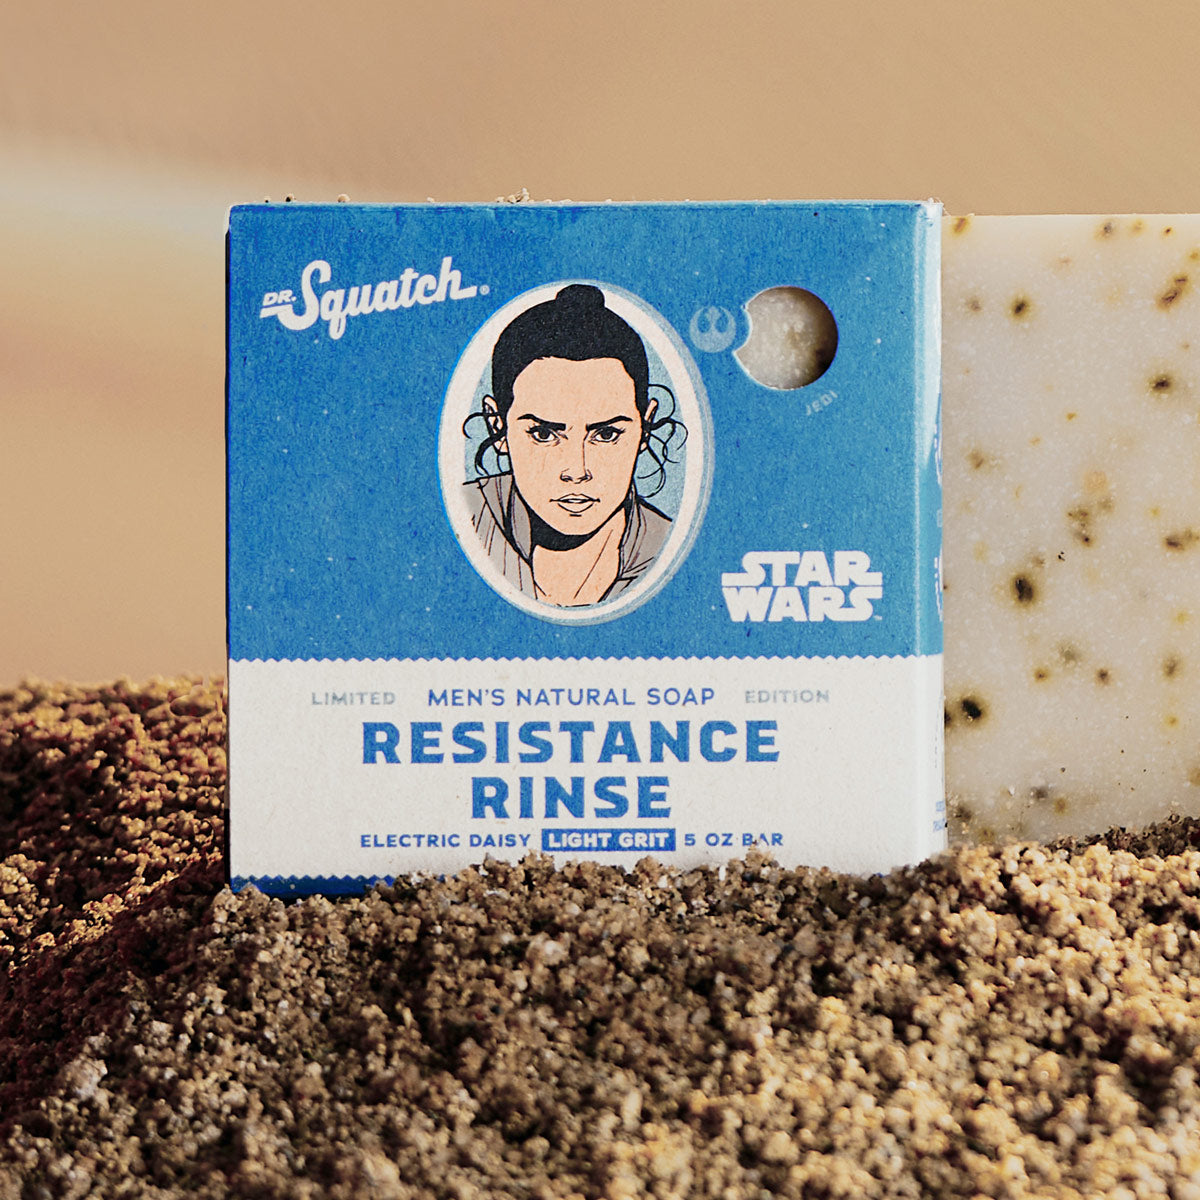 Dr. Squatch has crafted soaps in these Marvel and Star Wars gift sets.  @littletravelergeneva @drsquatch #littletravelergeneva…